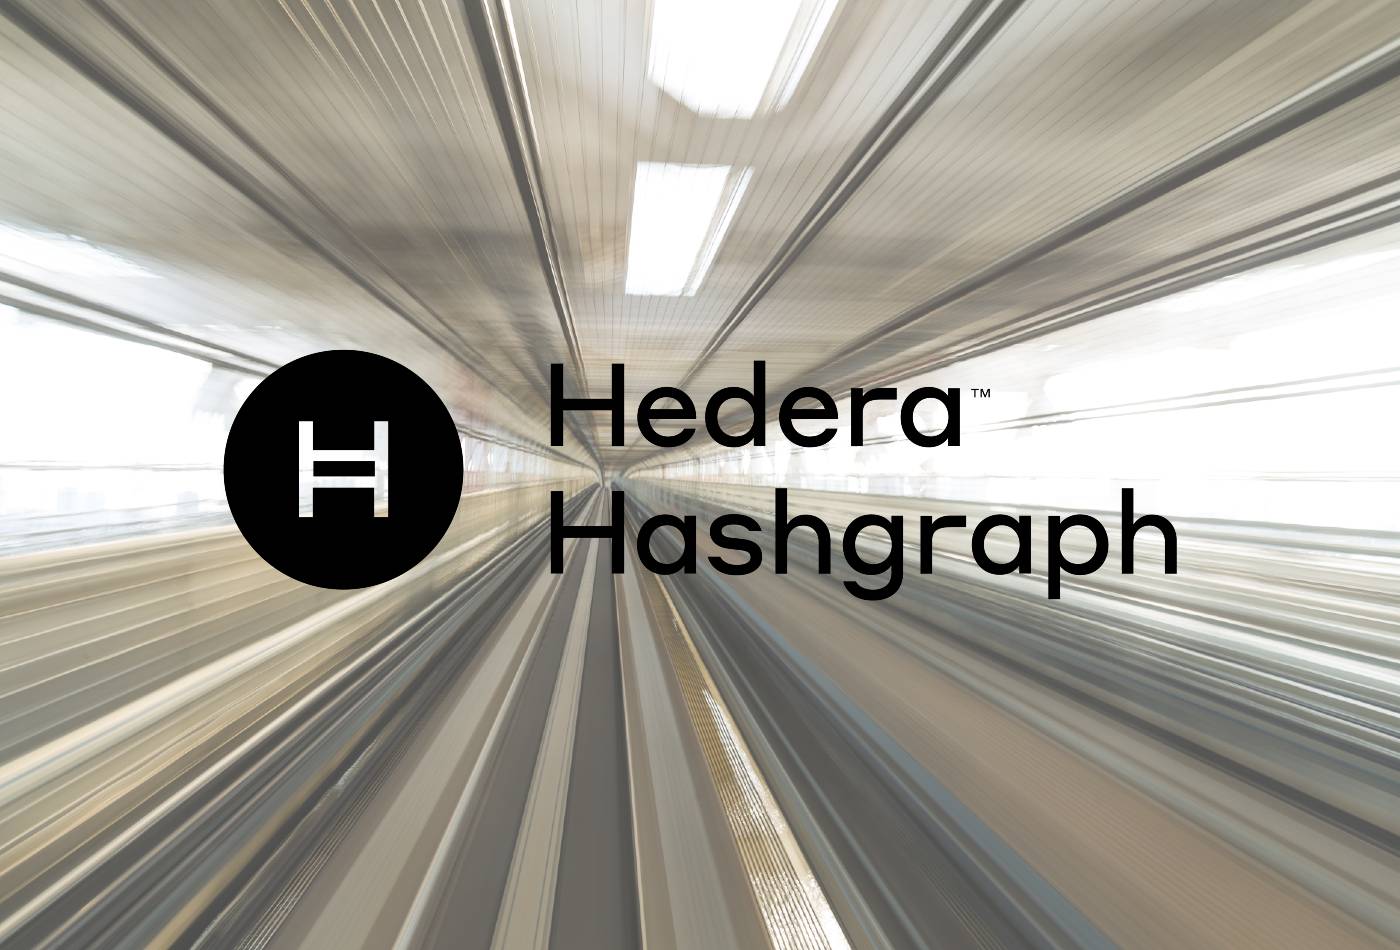 Hedera (HBAR) Price Prediction 2022-2030: The Best Time To Buy